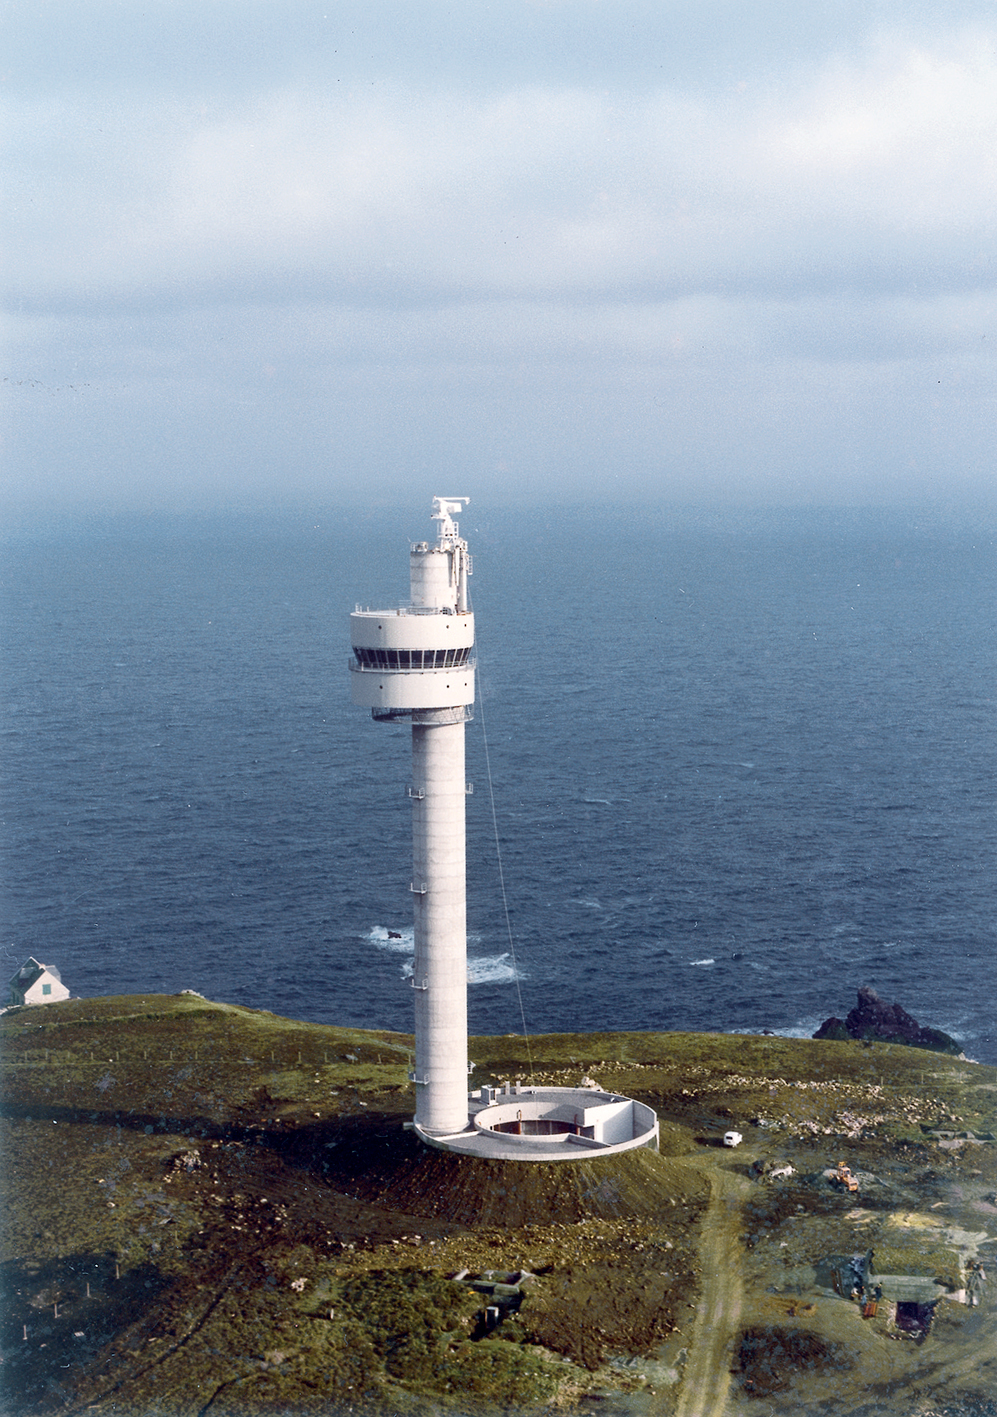 Relay tower, Ouessant, Finistère, 1978–1980 (engineer Jean Prouvé, with architect J.-M. Jacquin and engineer D. Ronsseray).